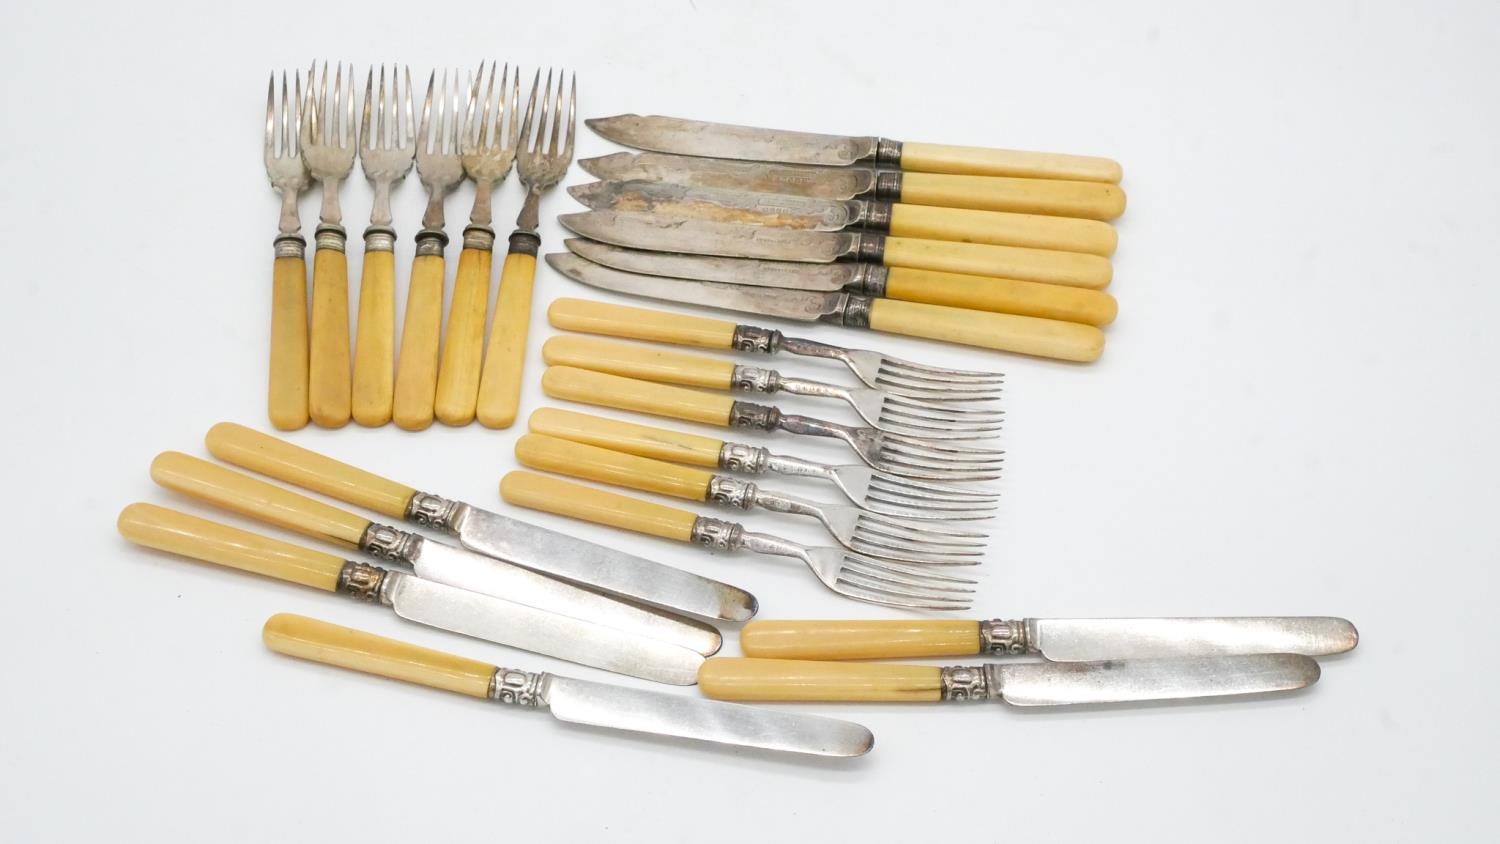 Two sets of twelve person silver plated cutlery. One set of fish knives and forks wuth engraved